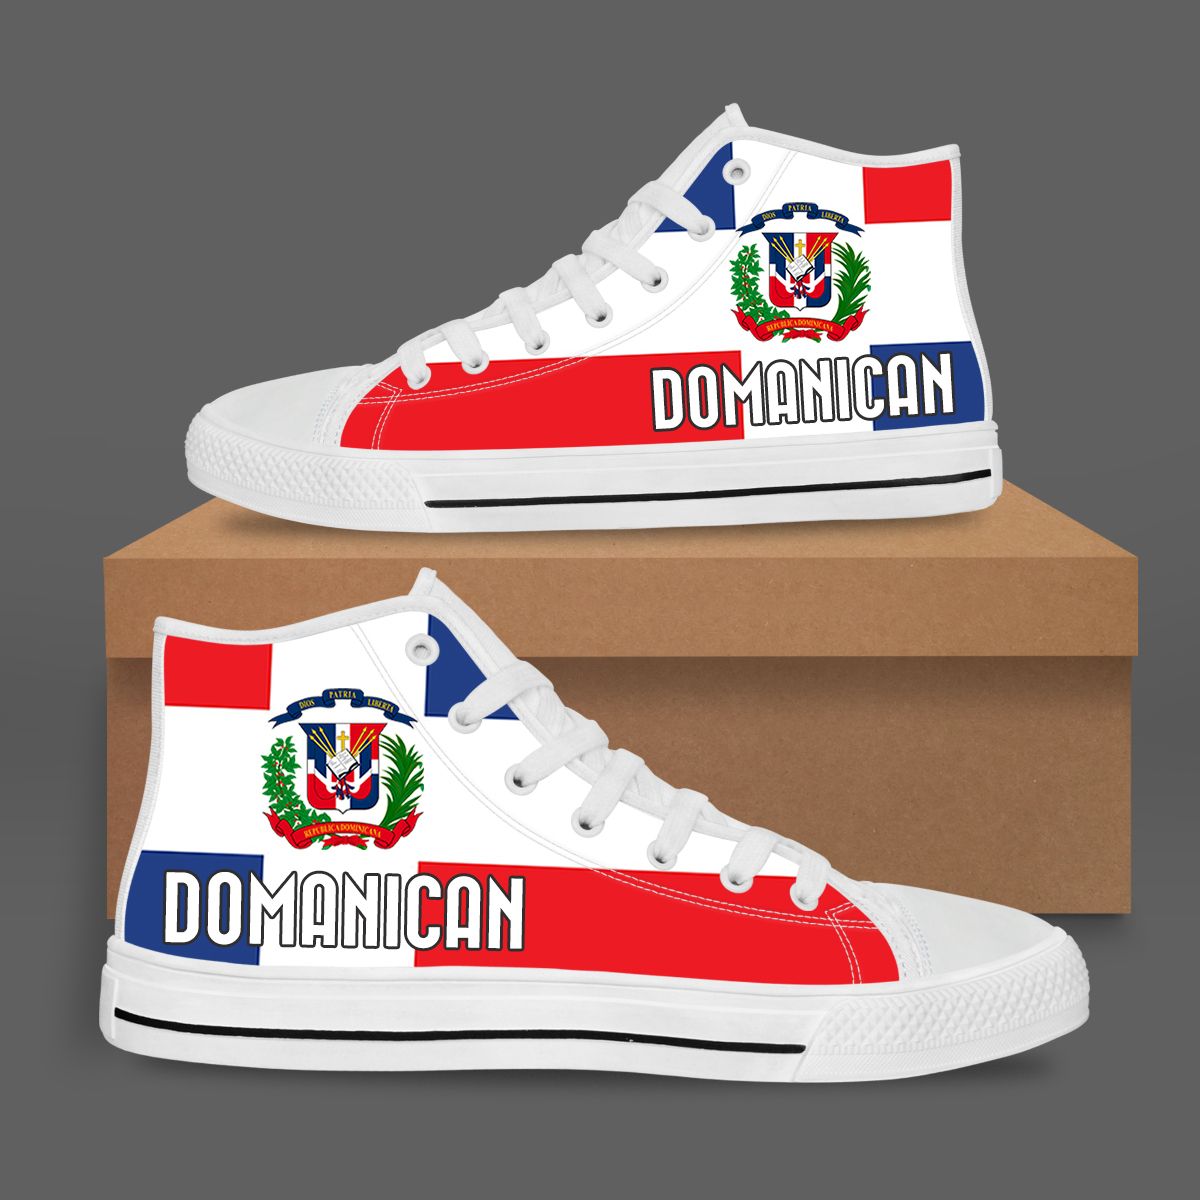 Domanican Printed On High Top Shoes